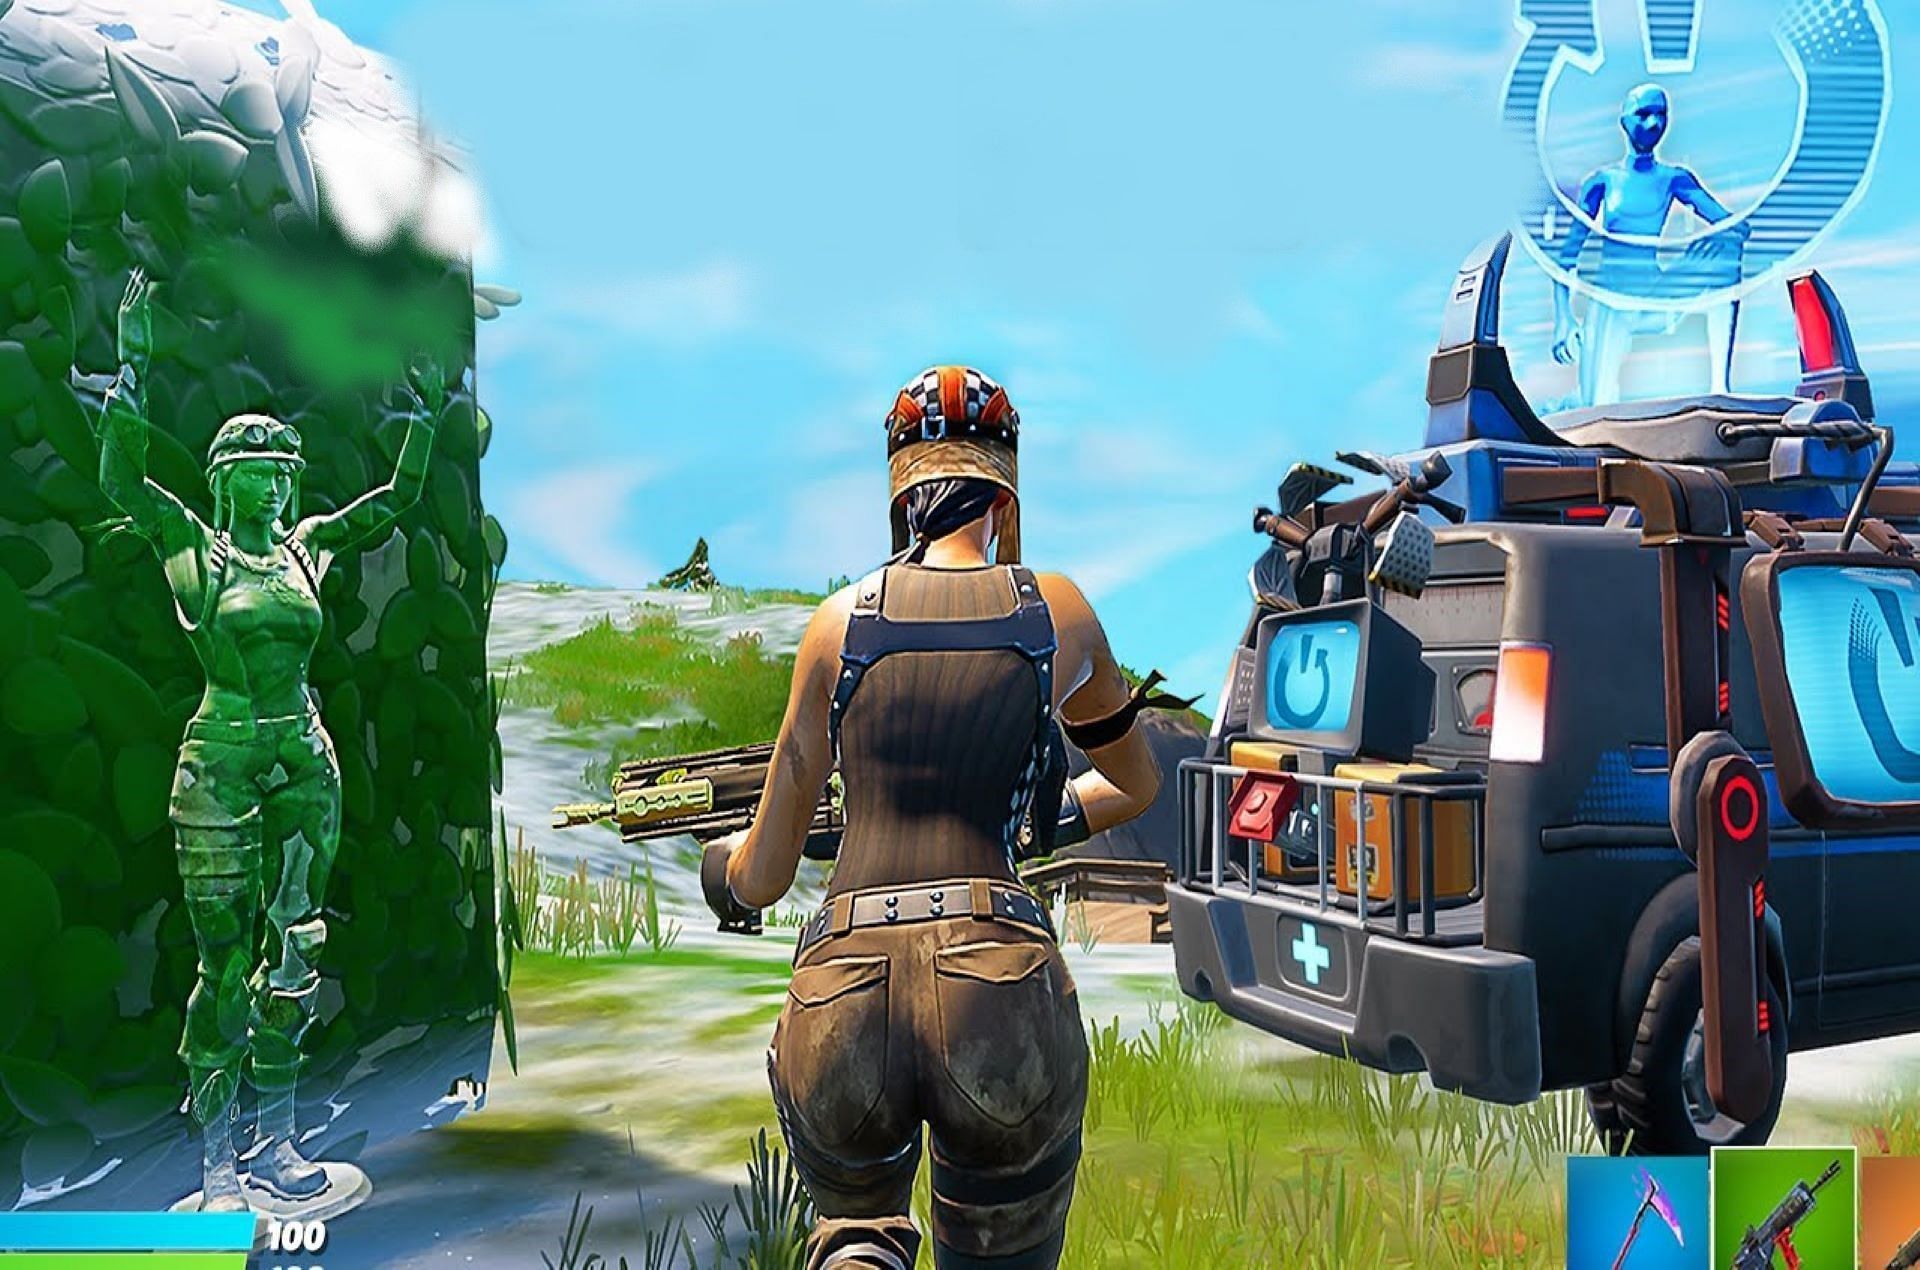 The purpose of the skins in Fortnite is to customize the characters in a un...